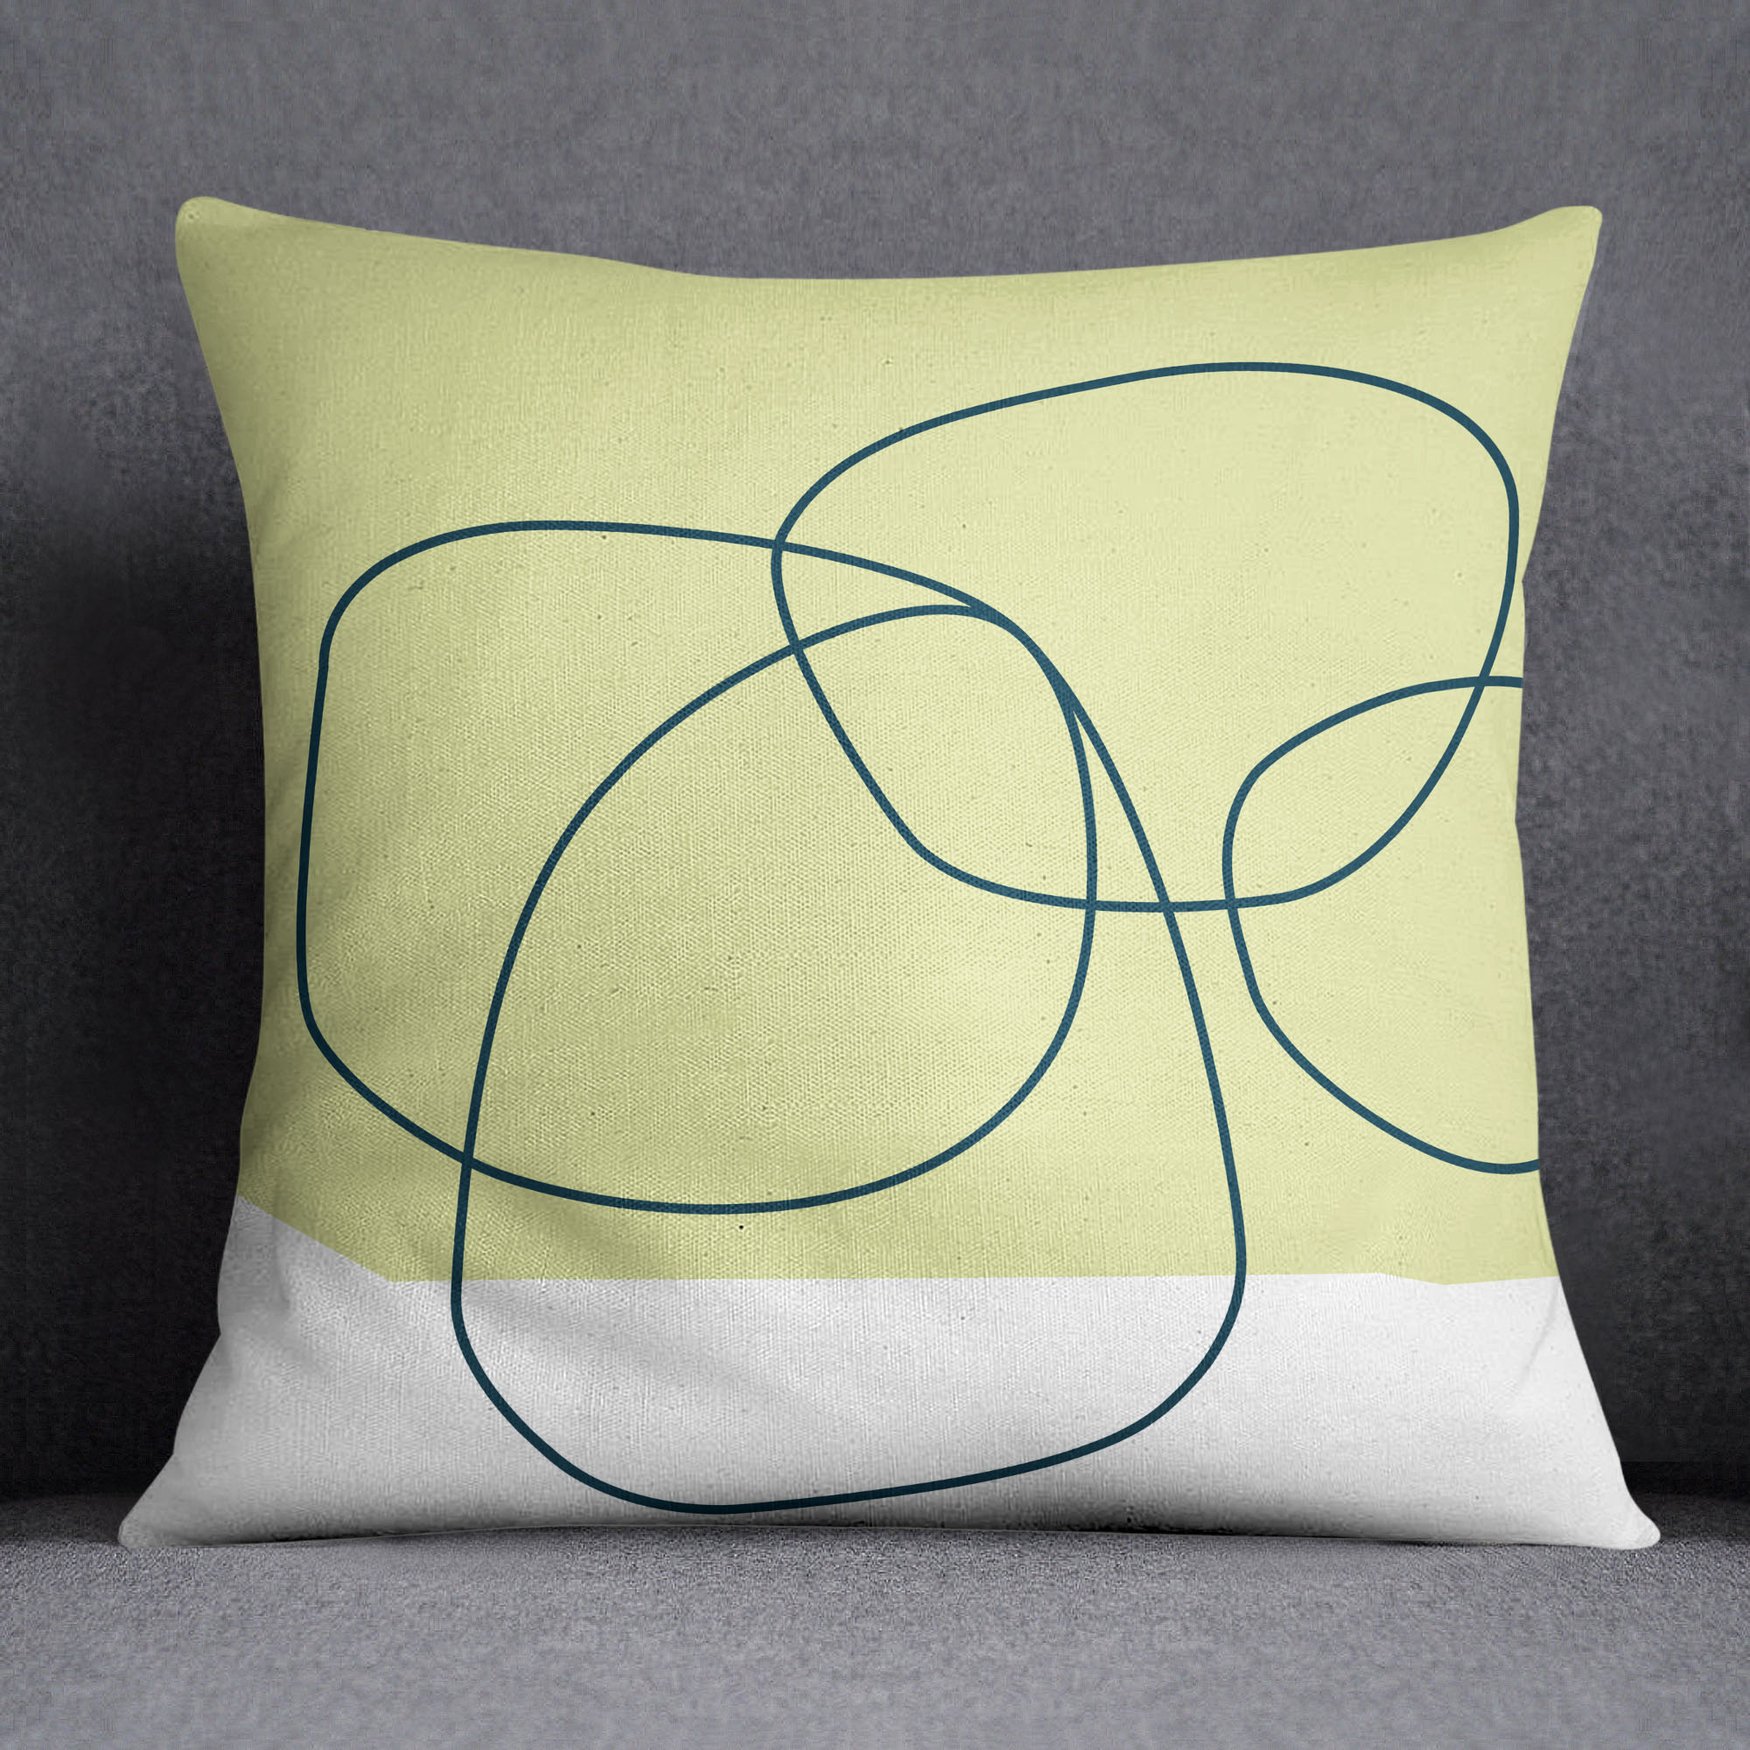 Image of Rock Garden No. 3 Square Throw Pillow in Light Yellow